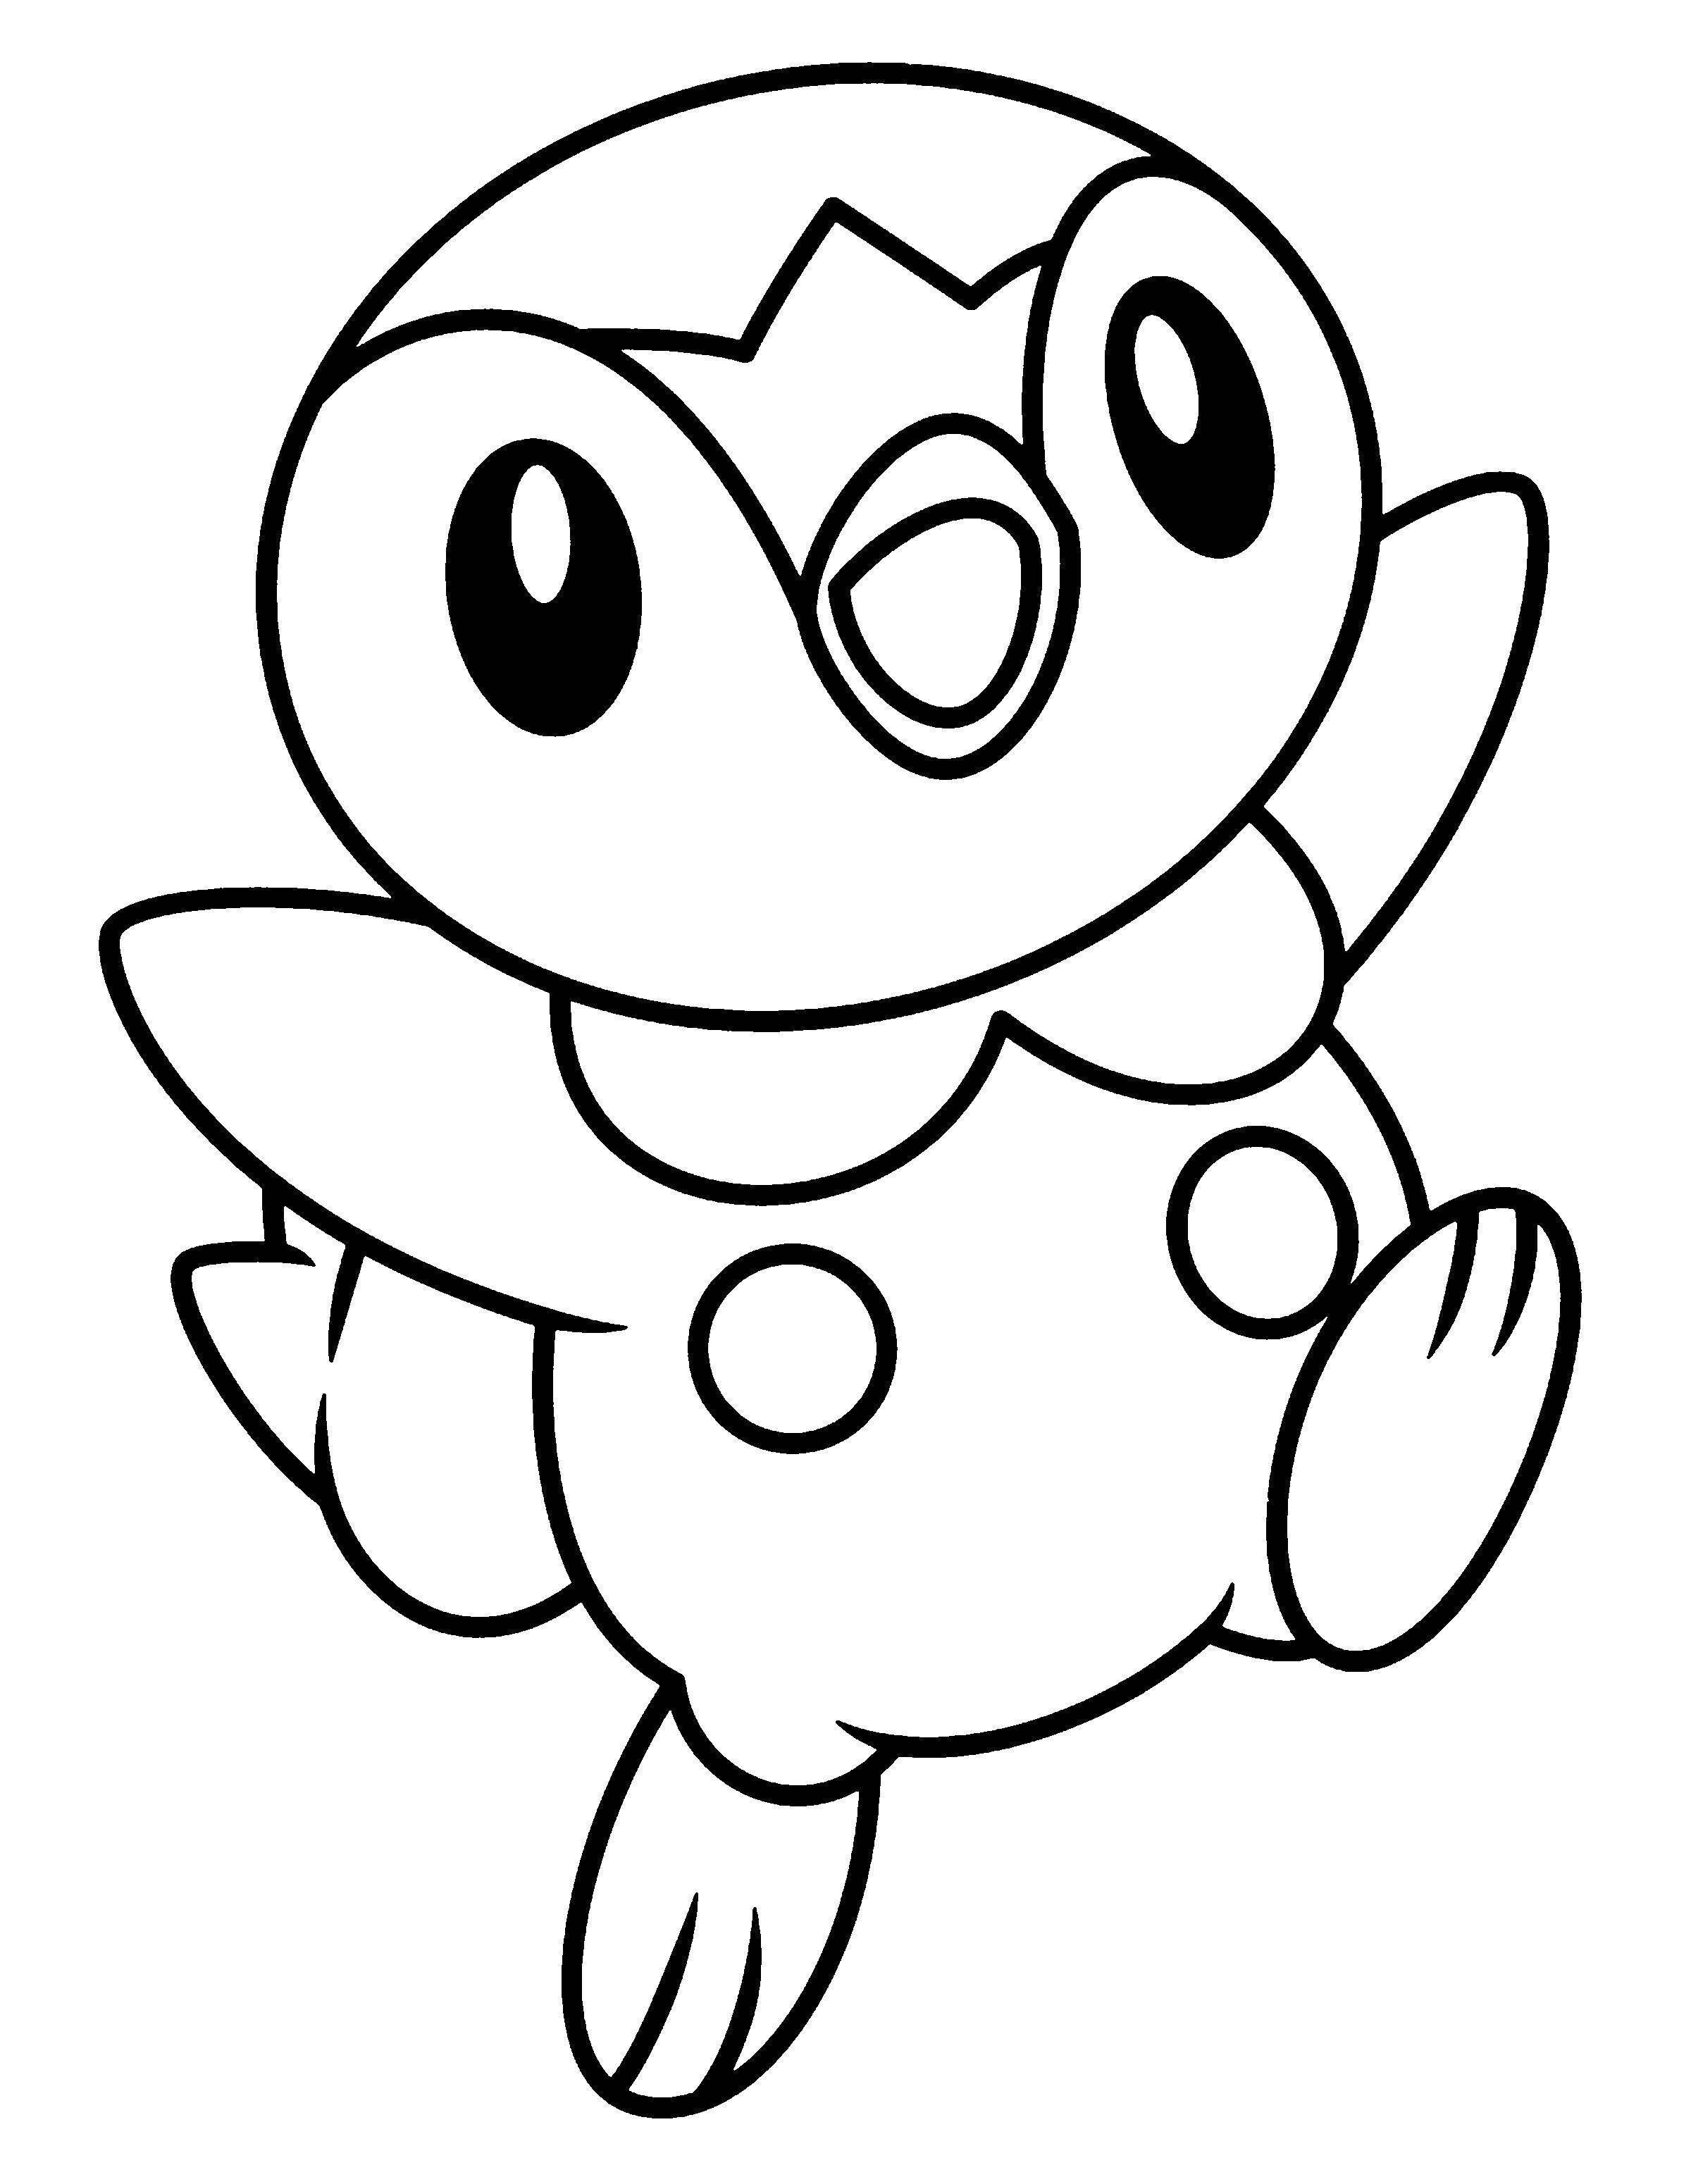 Coloring Pokemon piplup. Category Pokemon. Tags:  pokemon, Piplup.